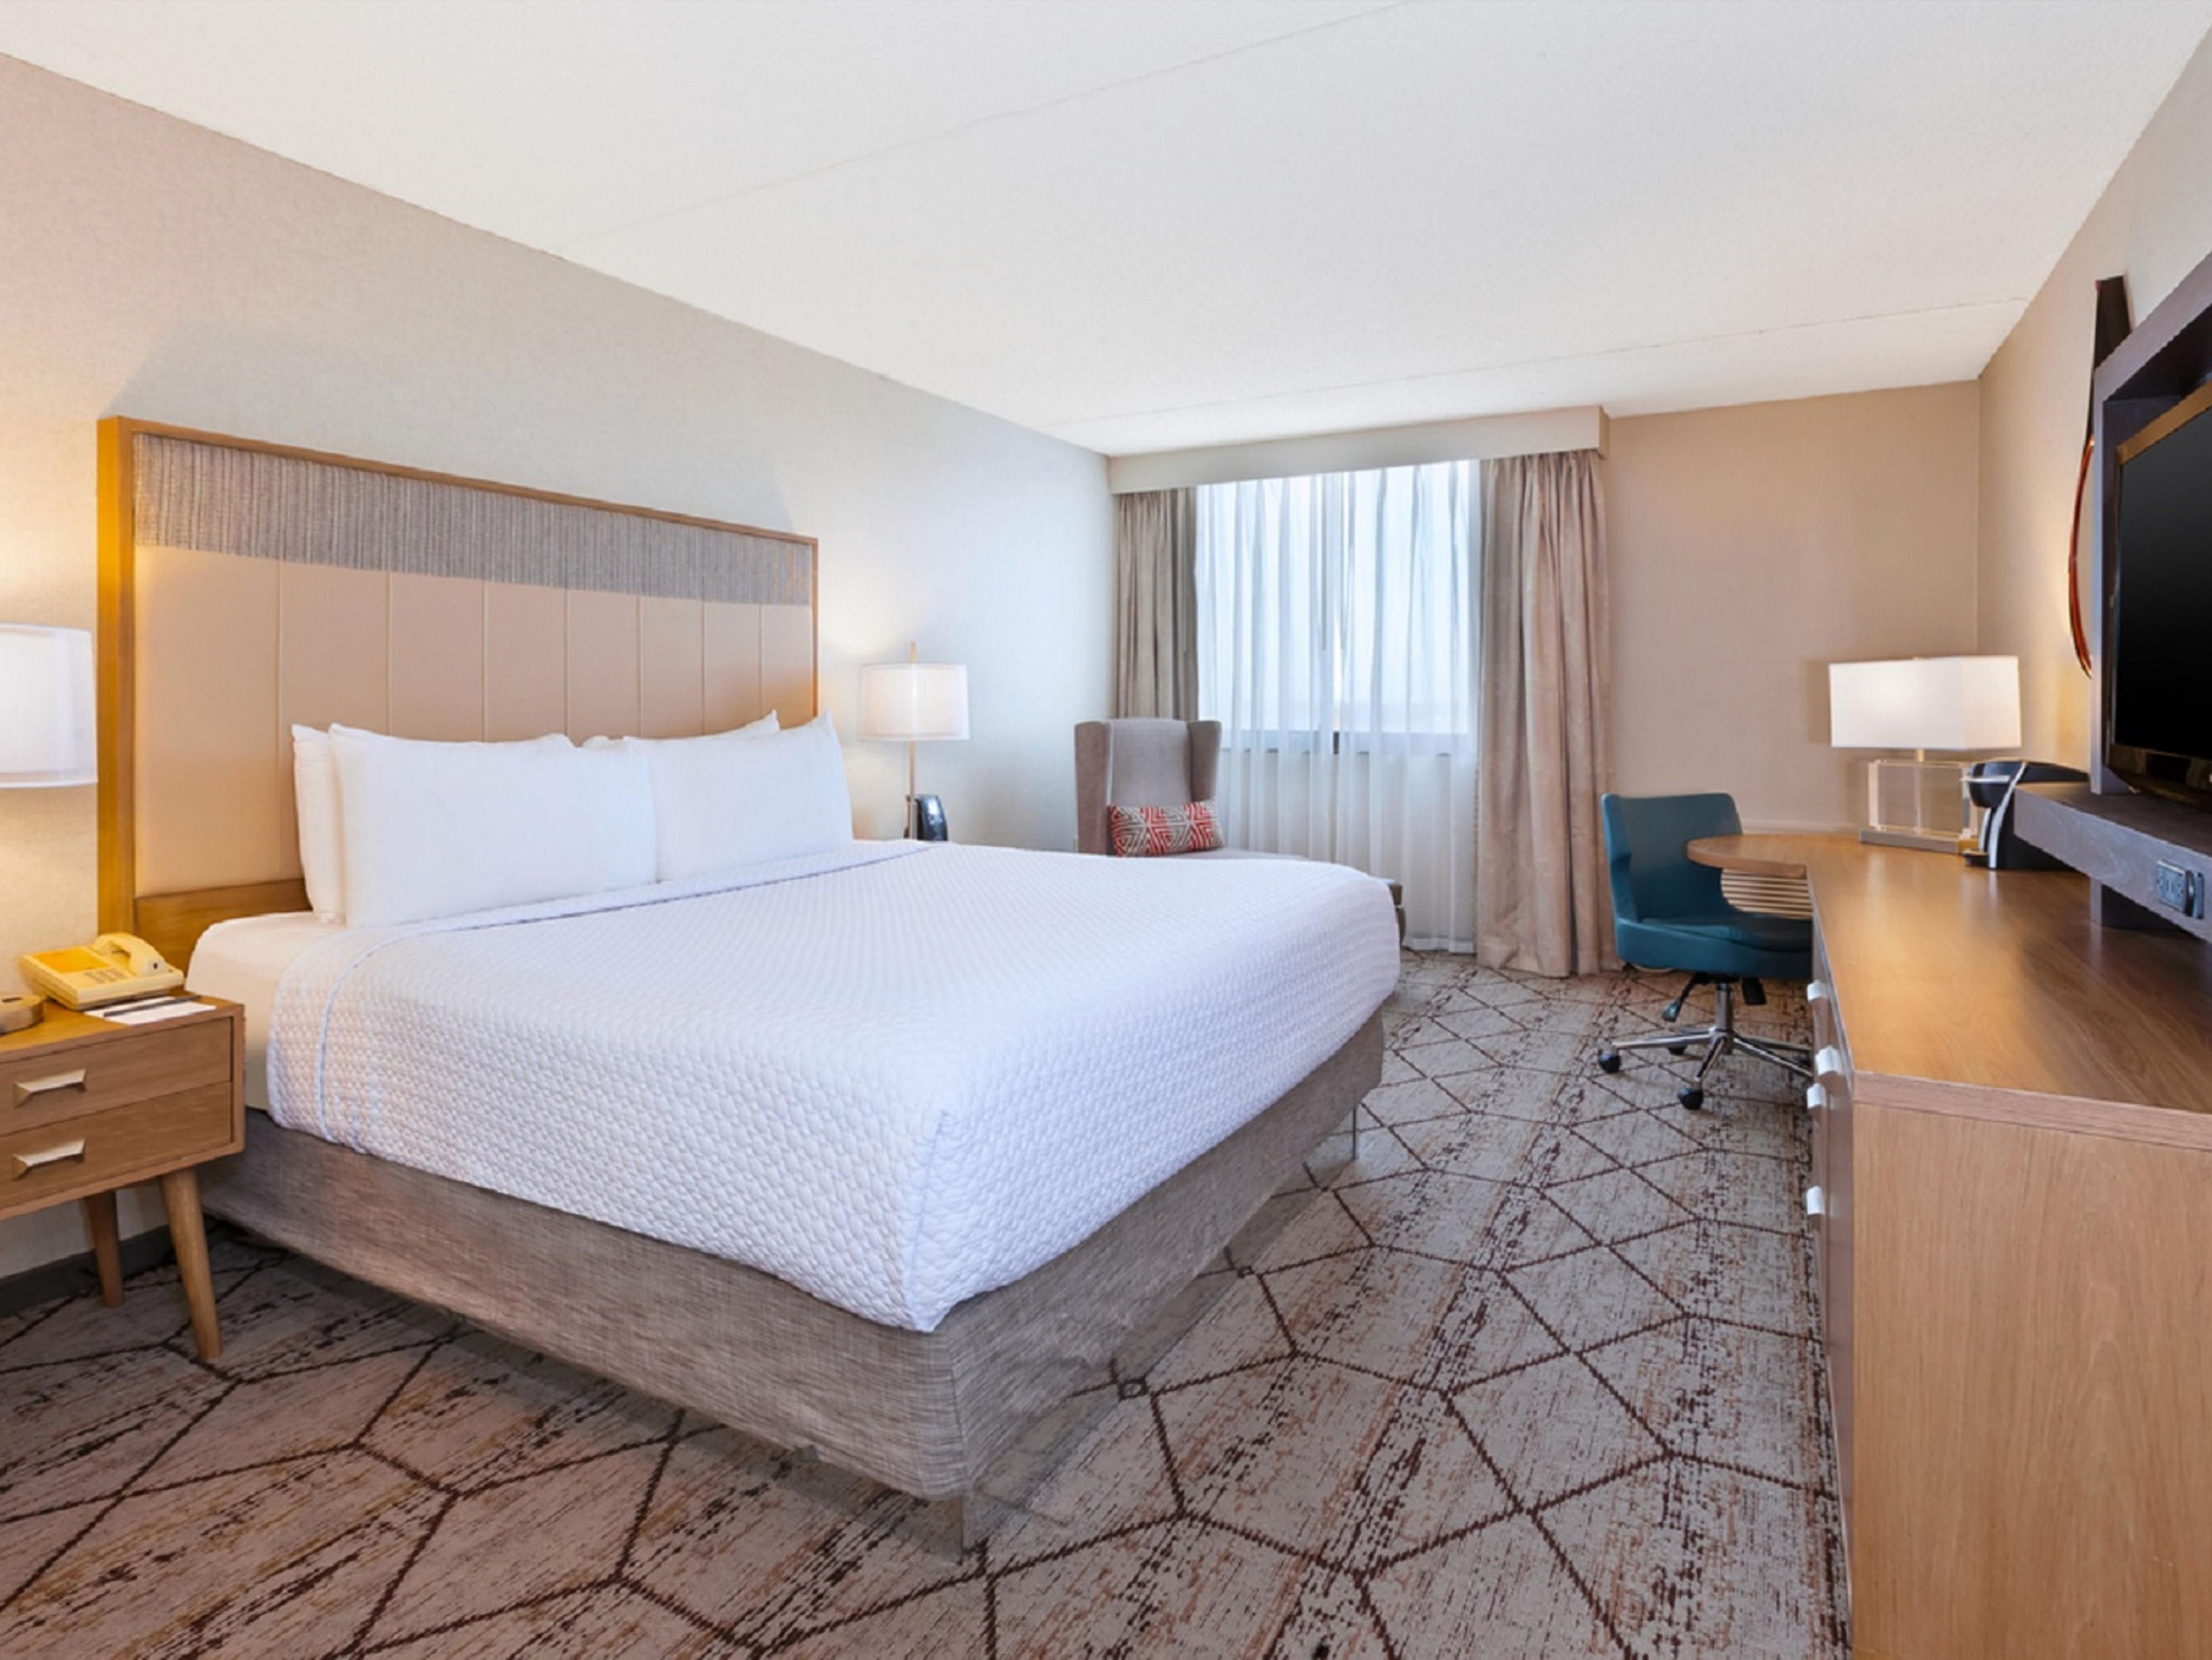 Relax in our elegant guest rooms and suites with premium bedding, and complimentary Wi-Fi. After your business meeting or day of exploring Columbus, take a dip in the indoor pool or a relaxing soak in the hot tub and end your night reclining in your well-appointed room.​